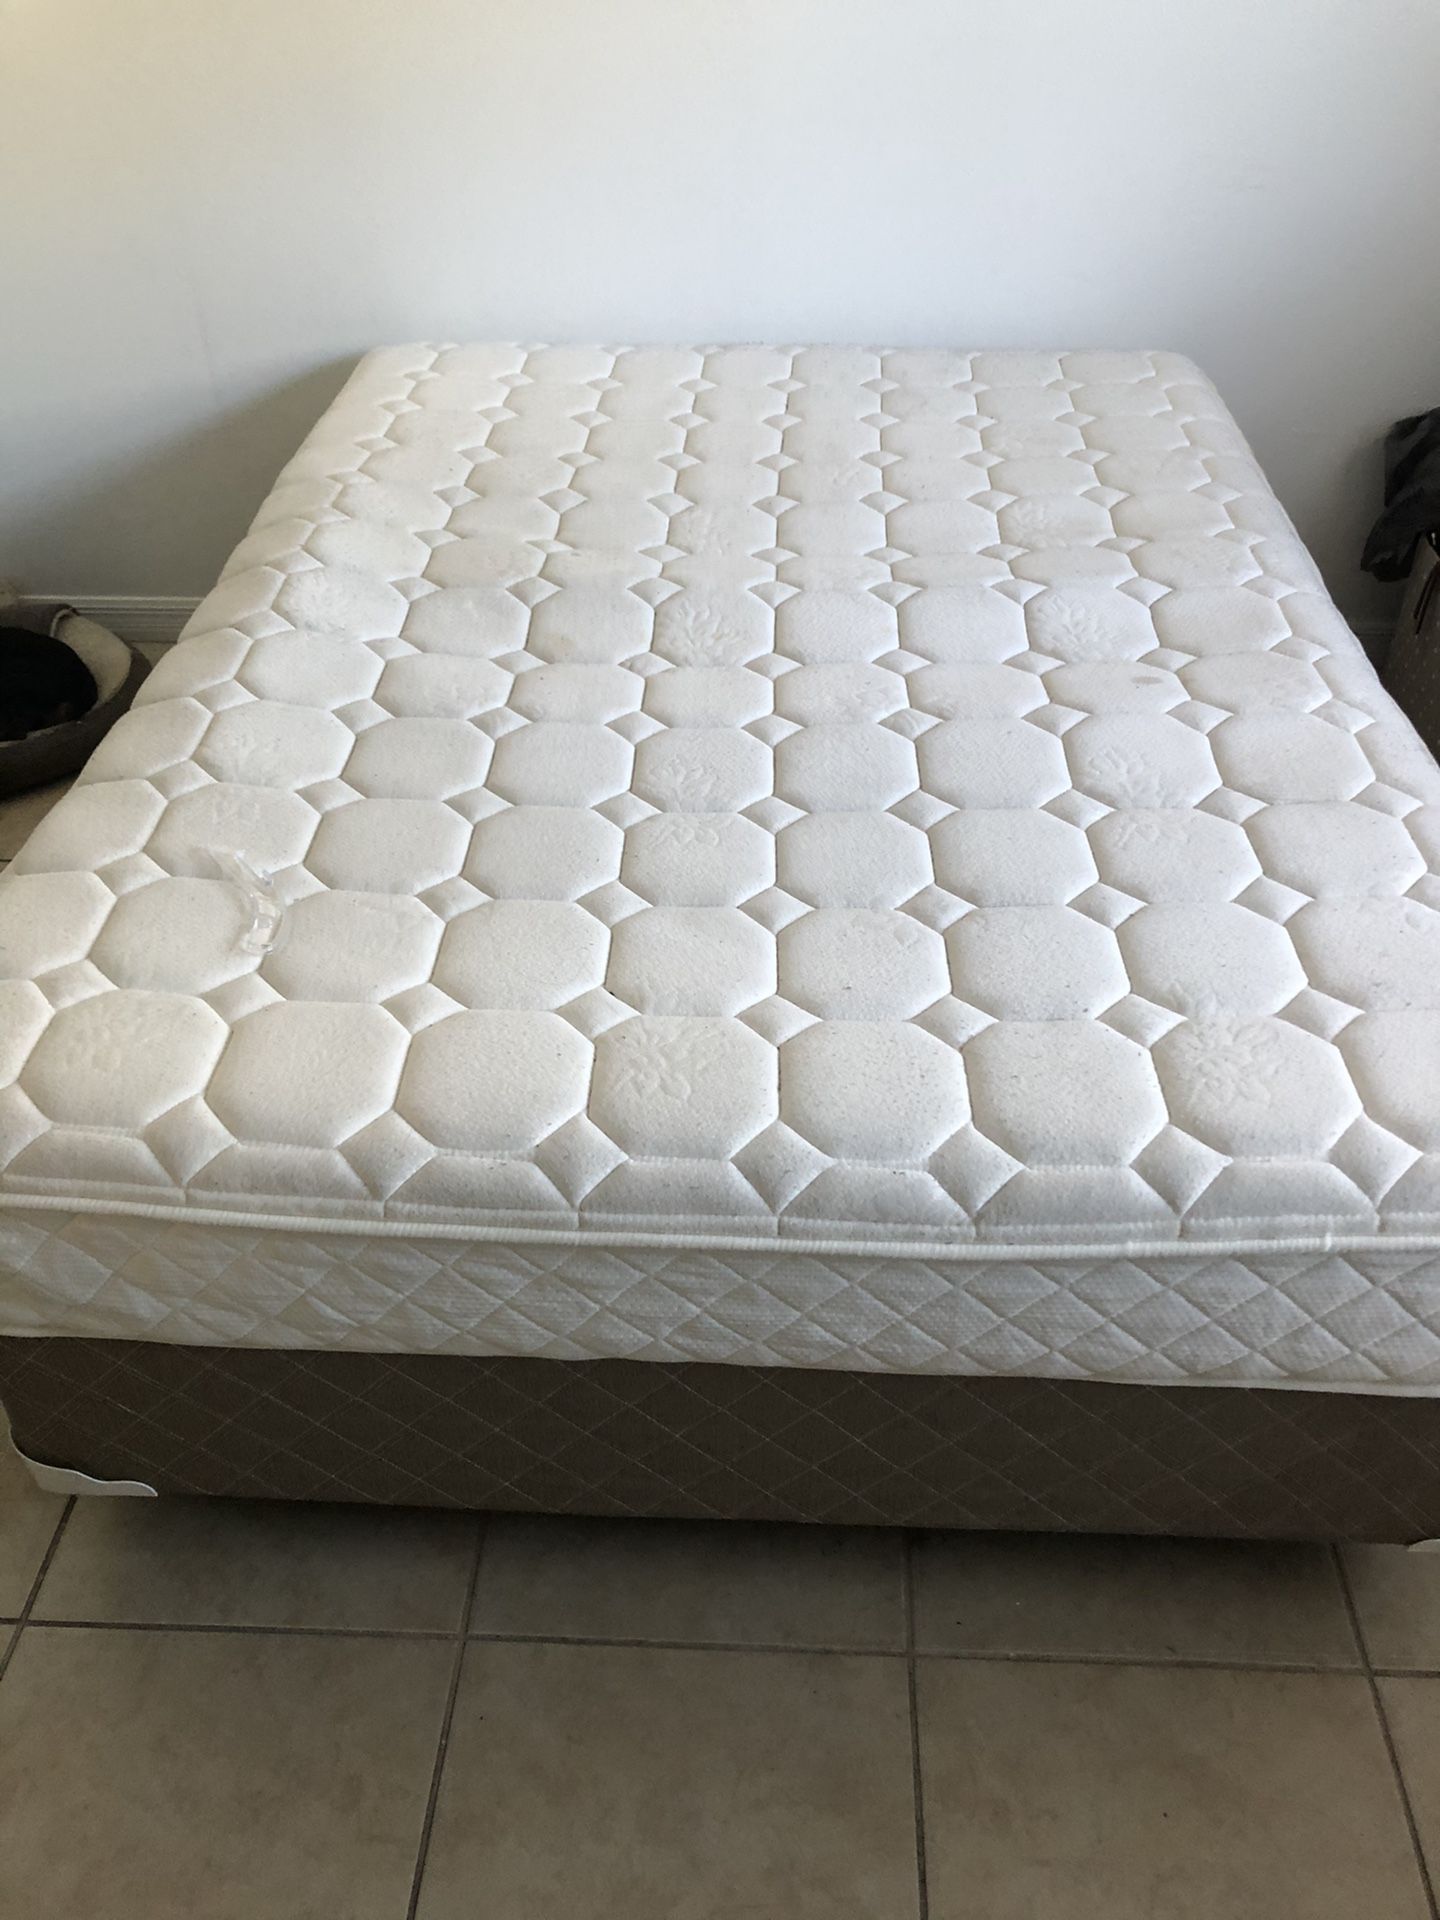 Full bed, mattress spring box and frame